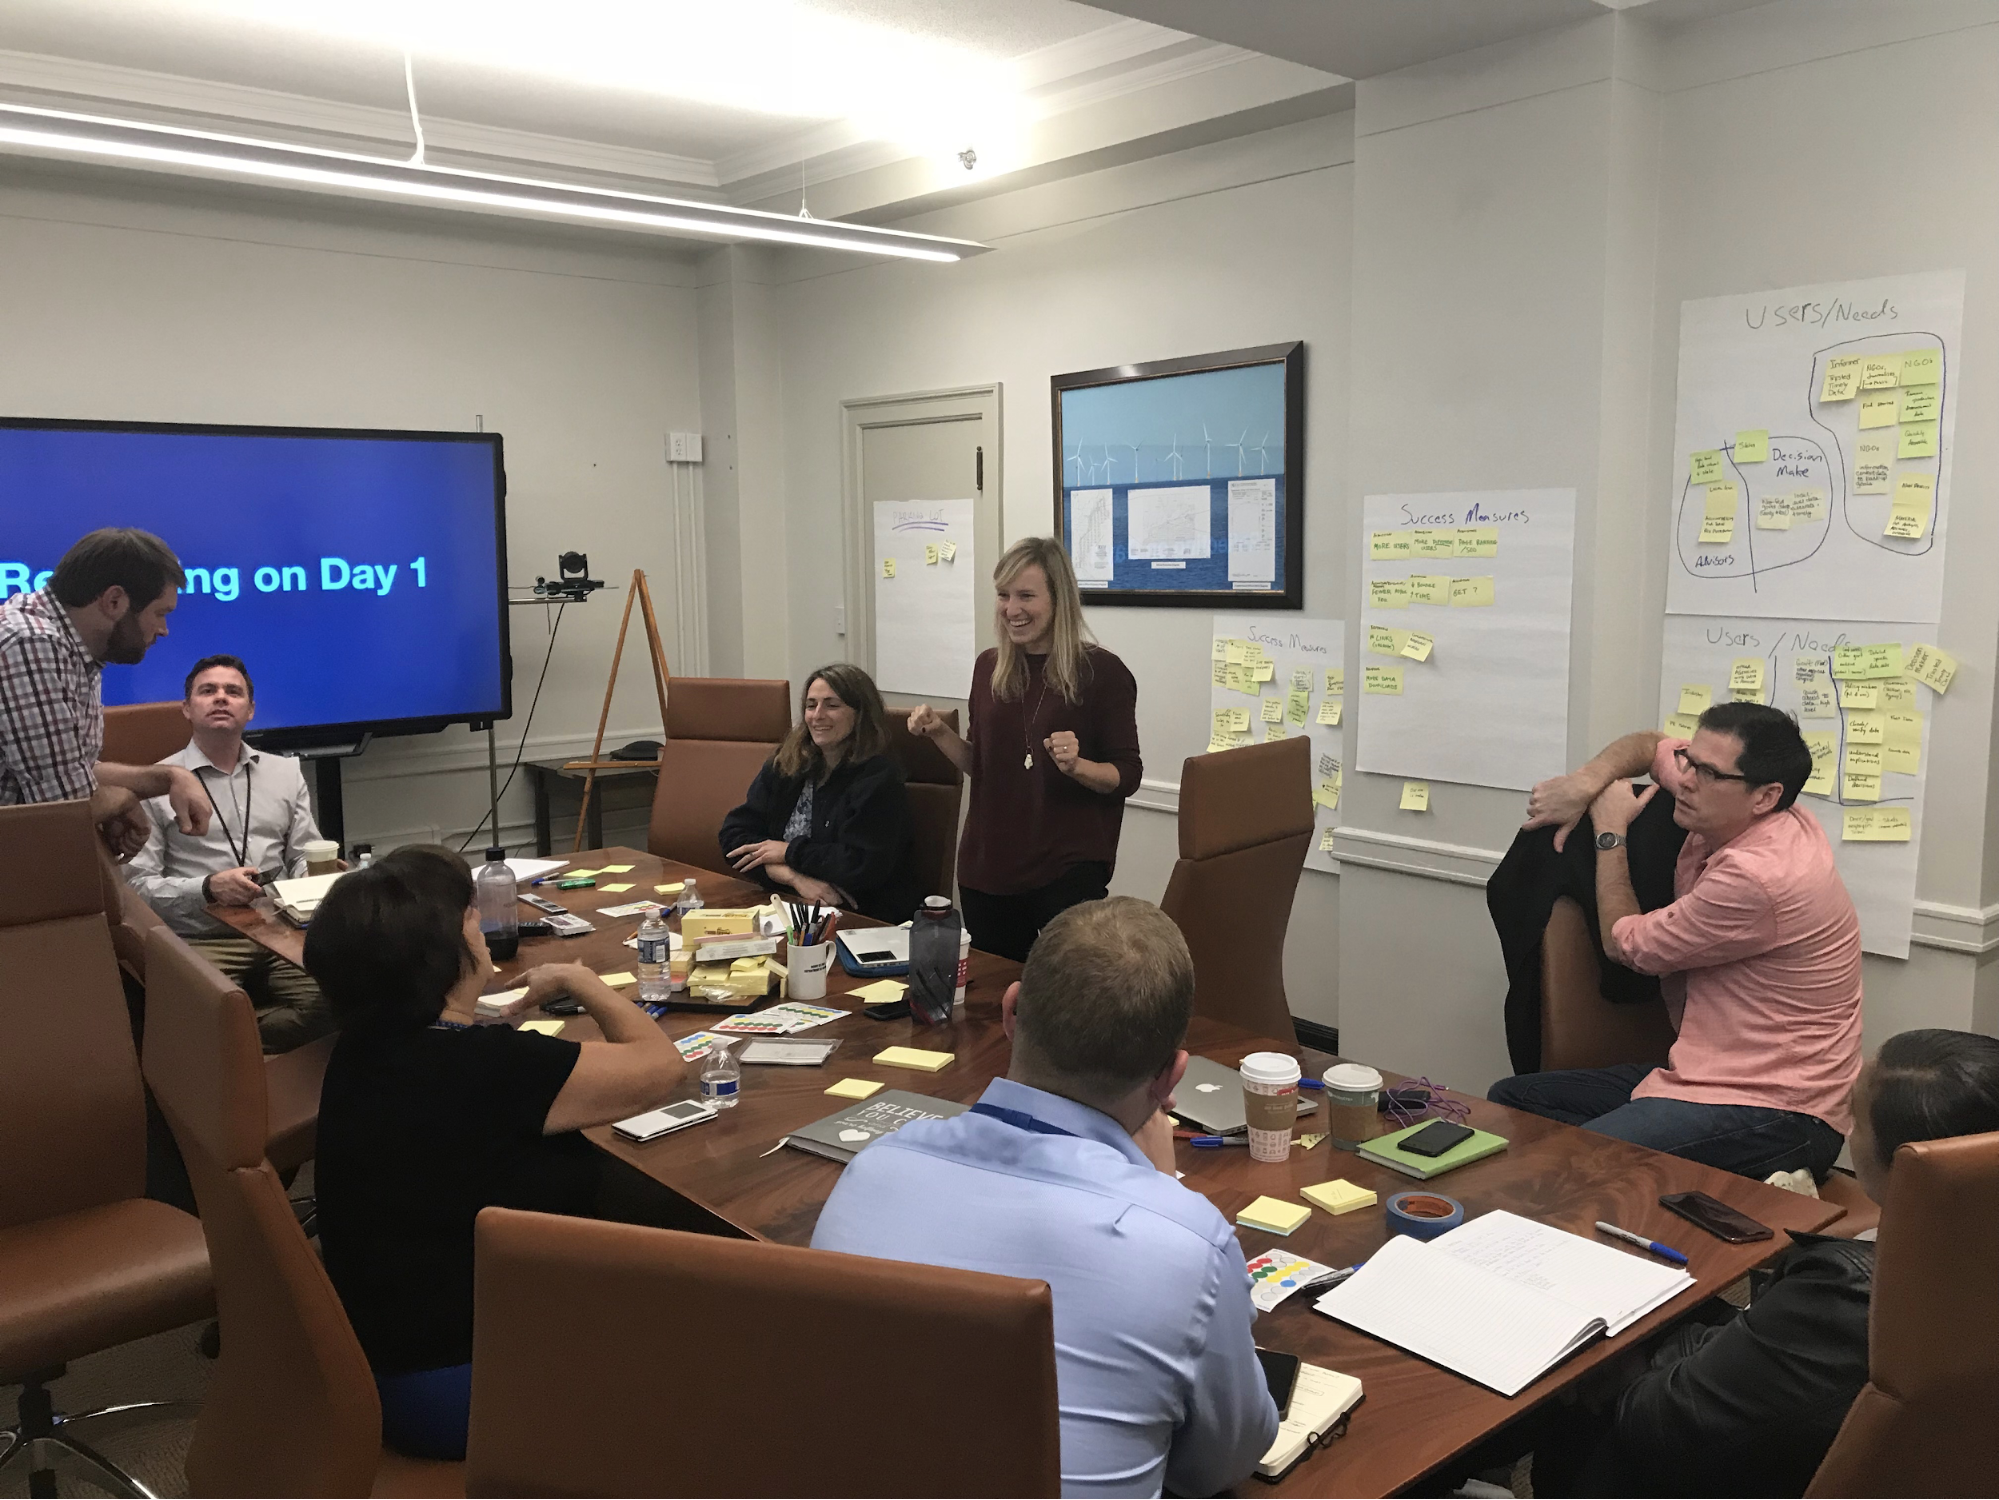 Product management workshop with 18F and ONRR. There is a group of people seating around a table with yellow stickie notes. On a wall there are long pieces of paper with yellow sticky notes on them